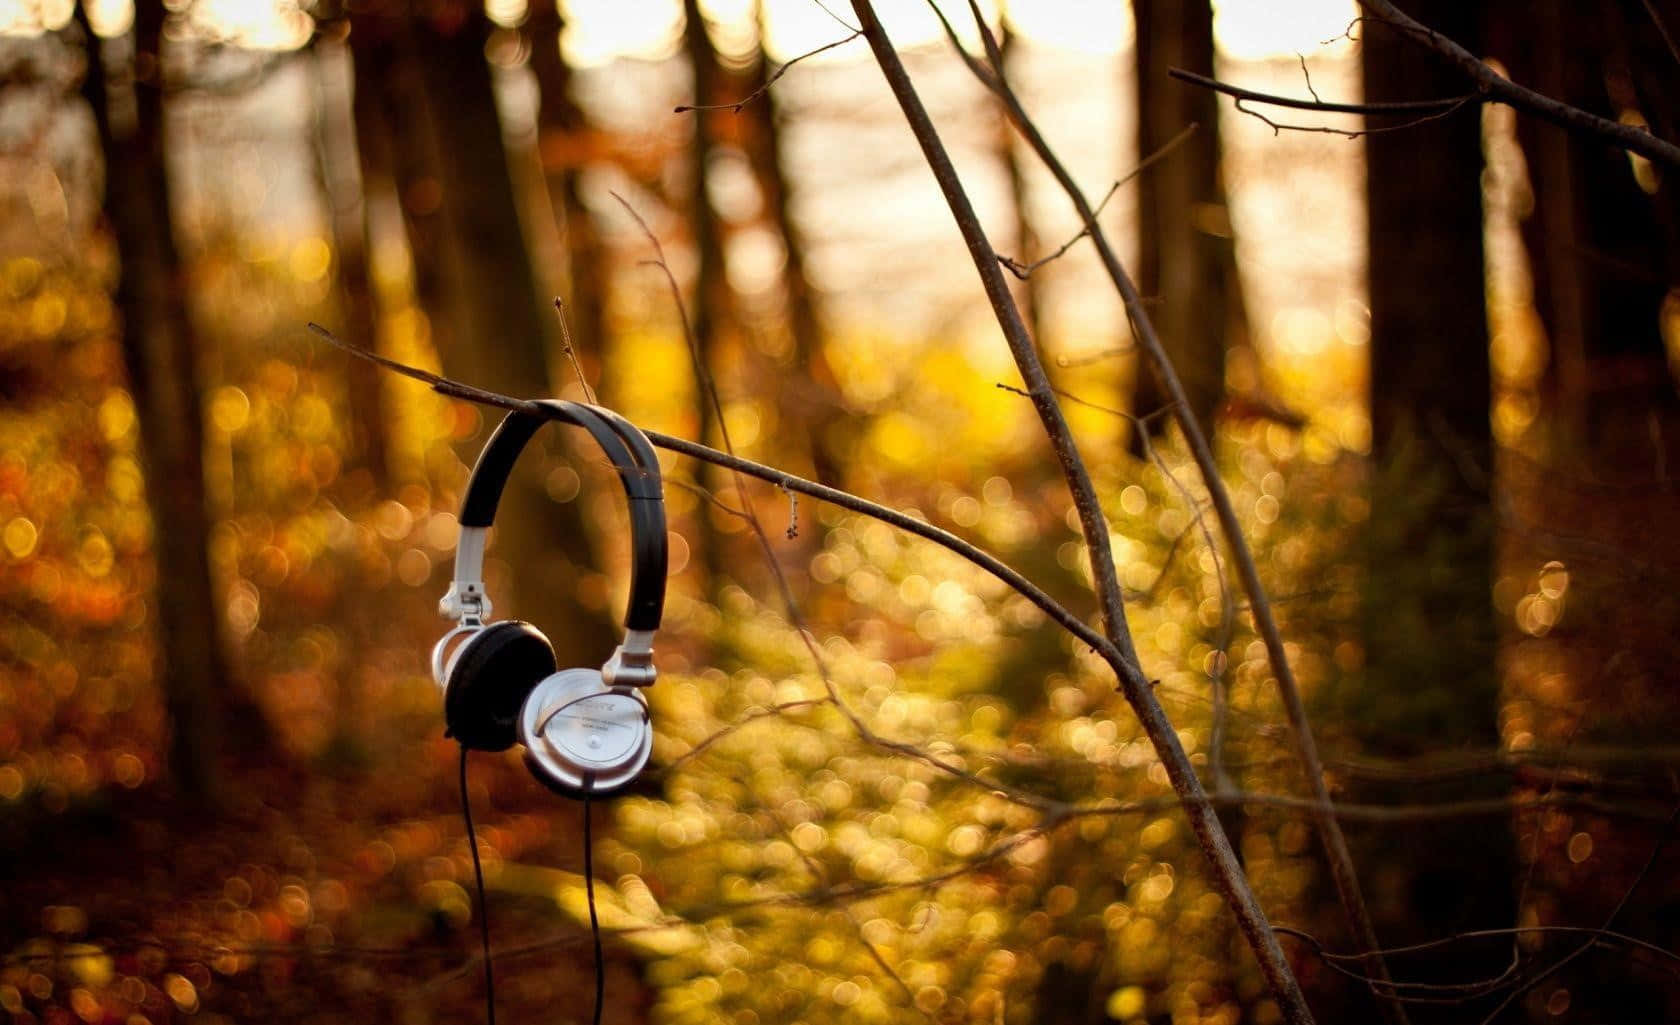 Get Lost in the Music with Quality Headphones